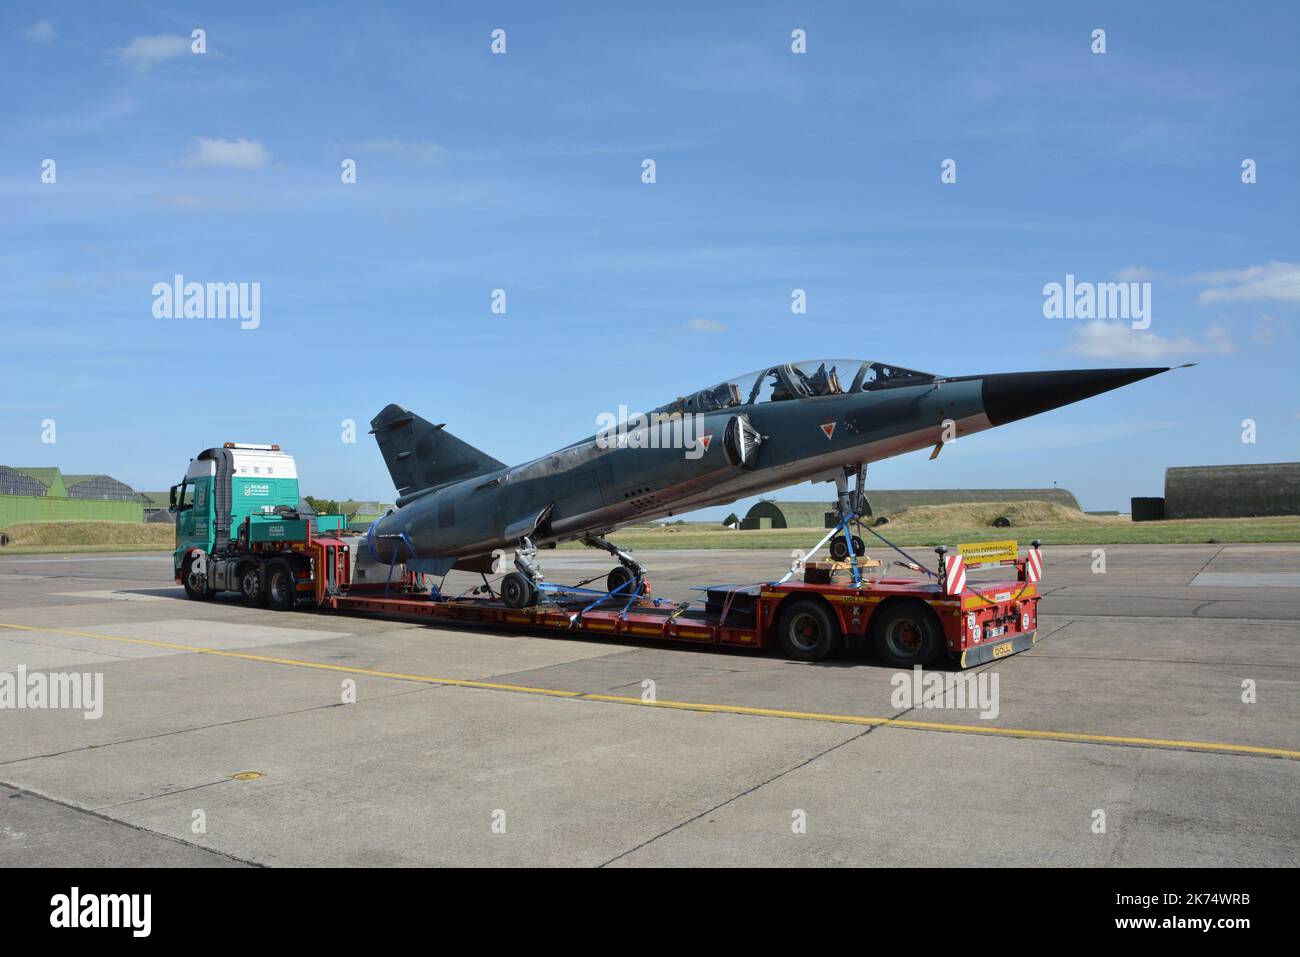 4 Air Force Mirage F1, stocked on the EAR 279 military place in Châteaudun, were sold to a South African company, Paramount Group, in June, via Eurotradia International, a Paris-based consulting firm, for 2 million euros. They were transported to Nîmes on trucks on Tuesday 29 August. Stock Photo